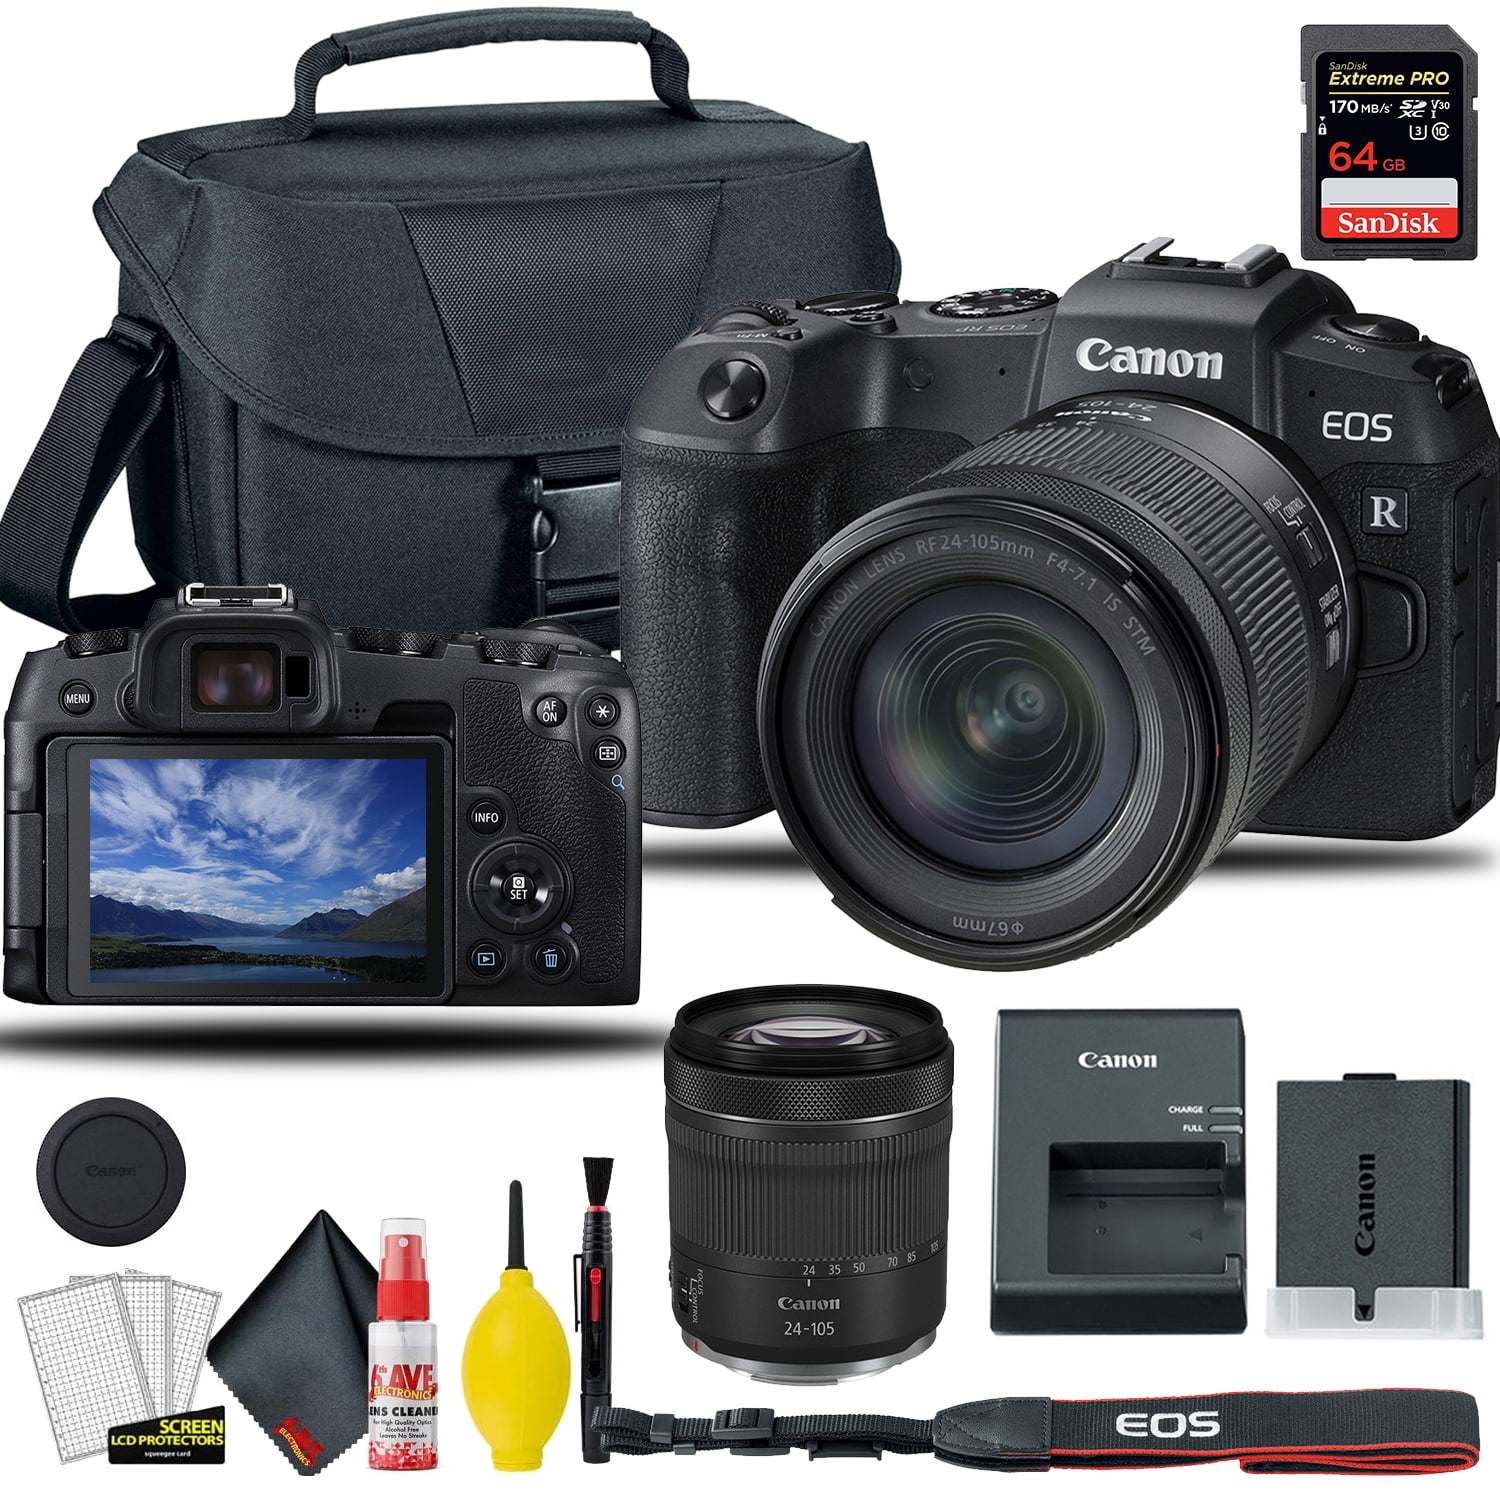 Canon EOS RP Mirrorless Digital Camera with 24-105mm f/4-7.1 Lens